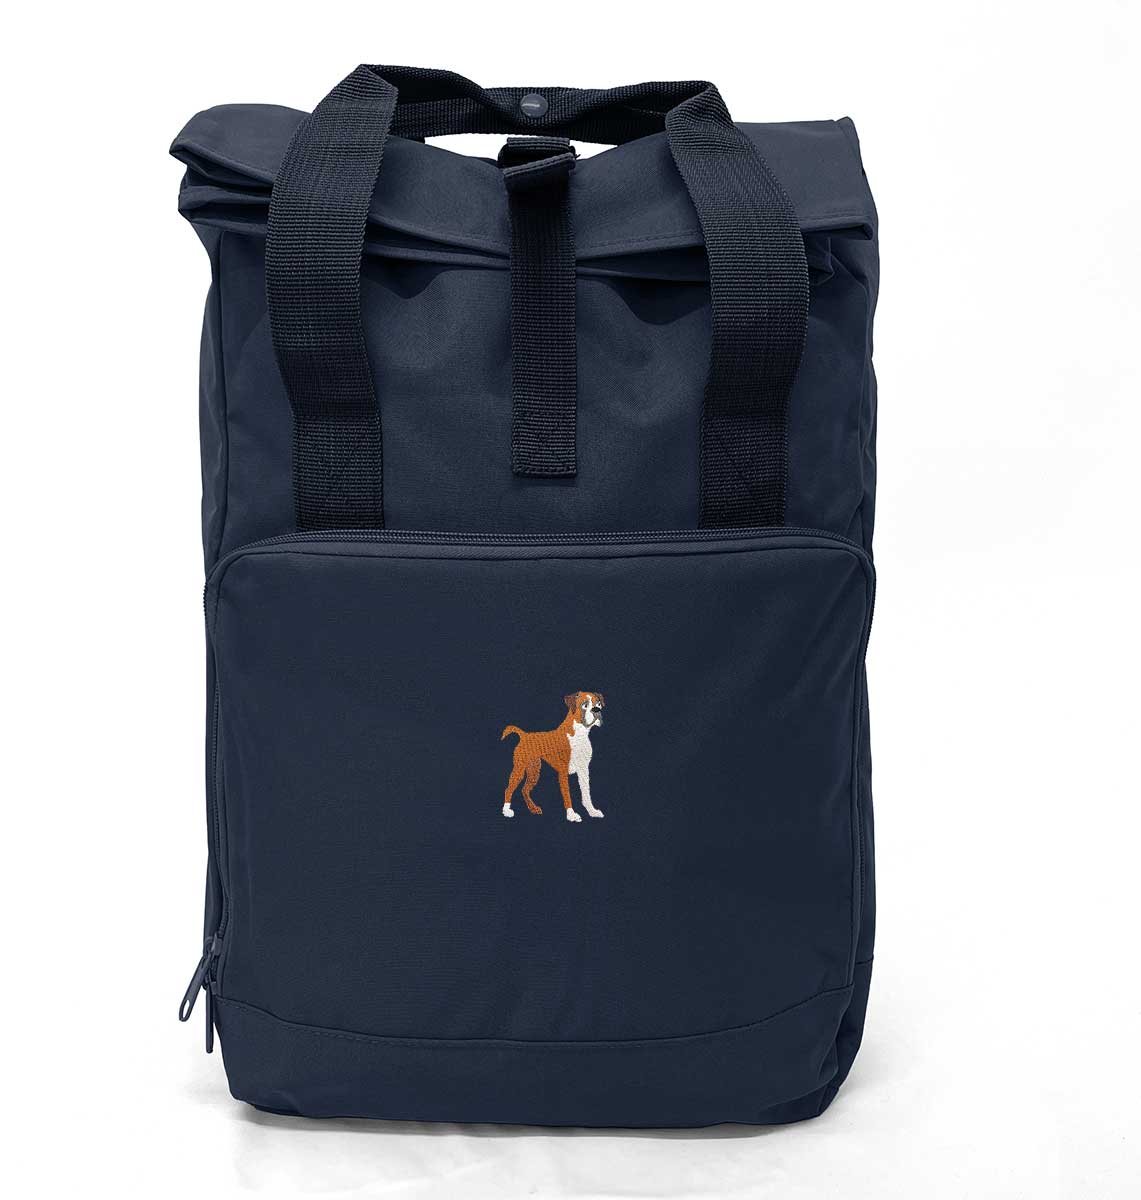 Boxer Dog Roll-top Laptop Recycled Backpack - Blue Panda